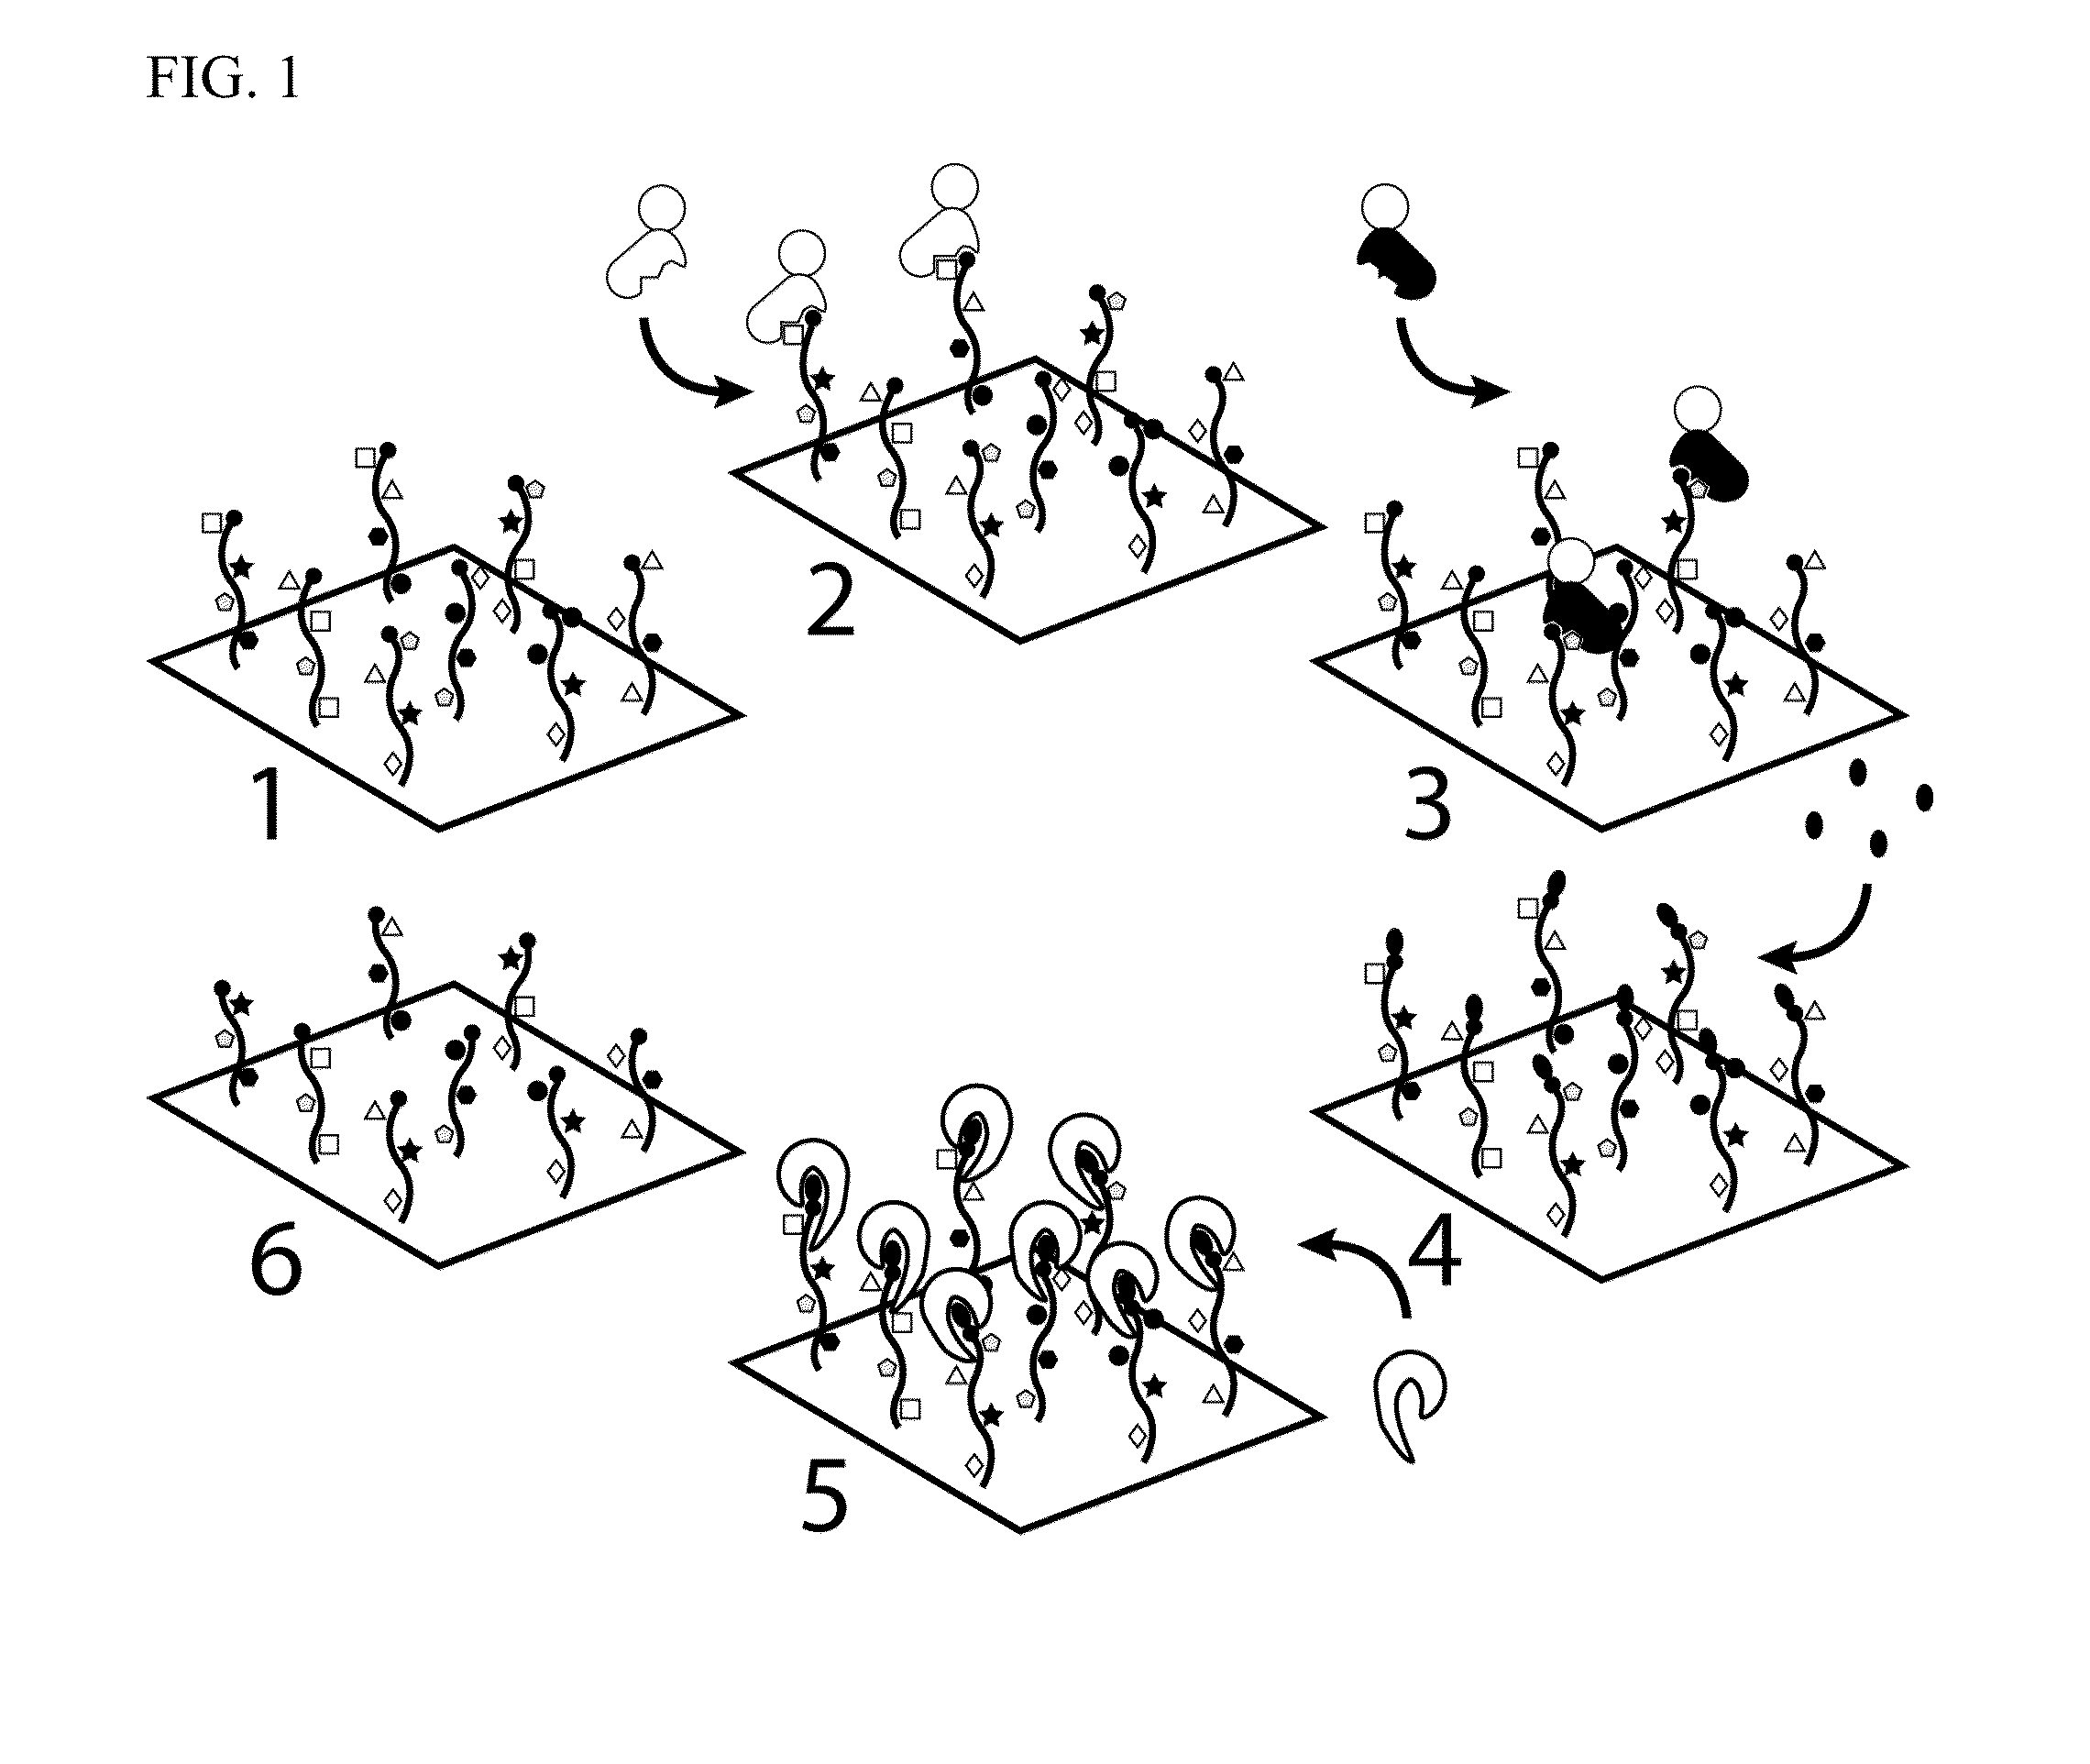 Molecules and methods for iterative polypeptide analysis and processing